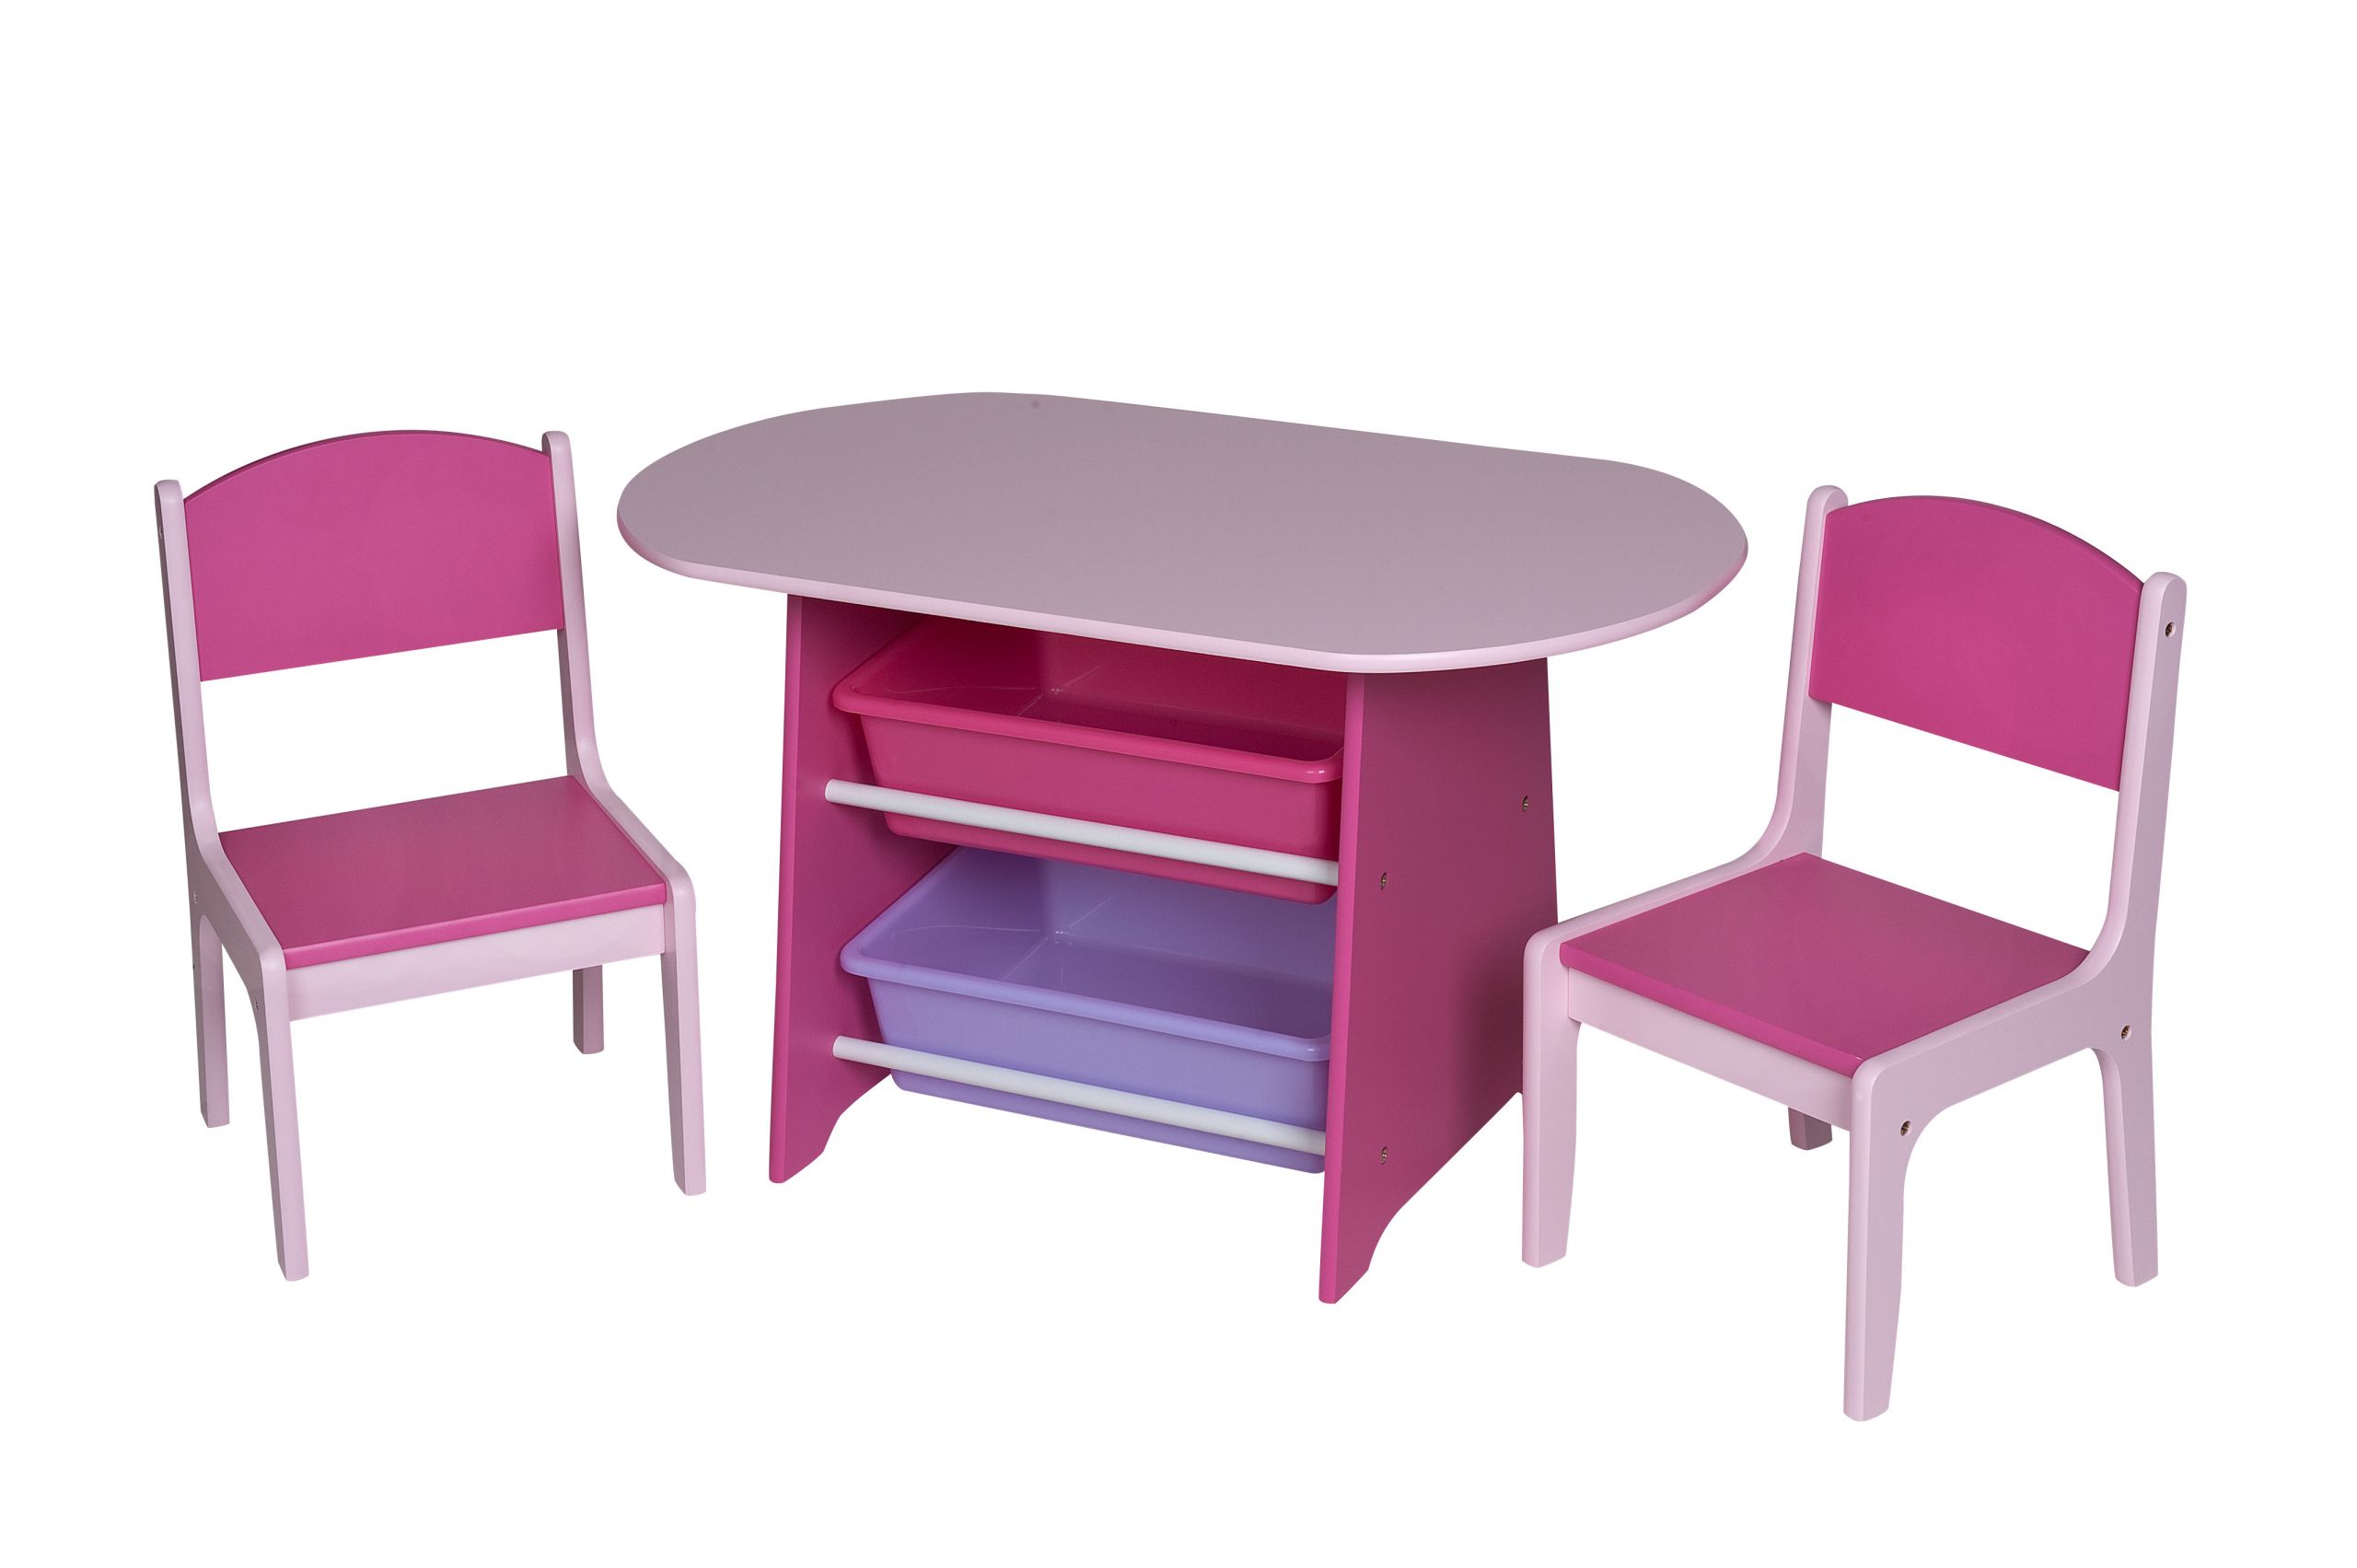 Children'S Table With Storage
 Children s Oval Table w 2 Chairs and 2 Storage Bins